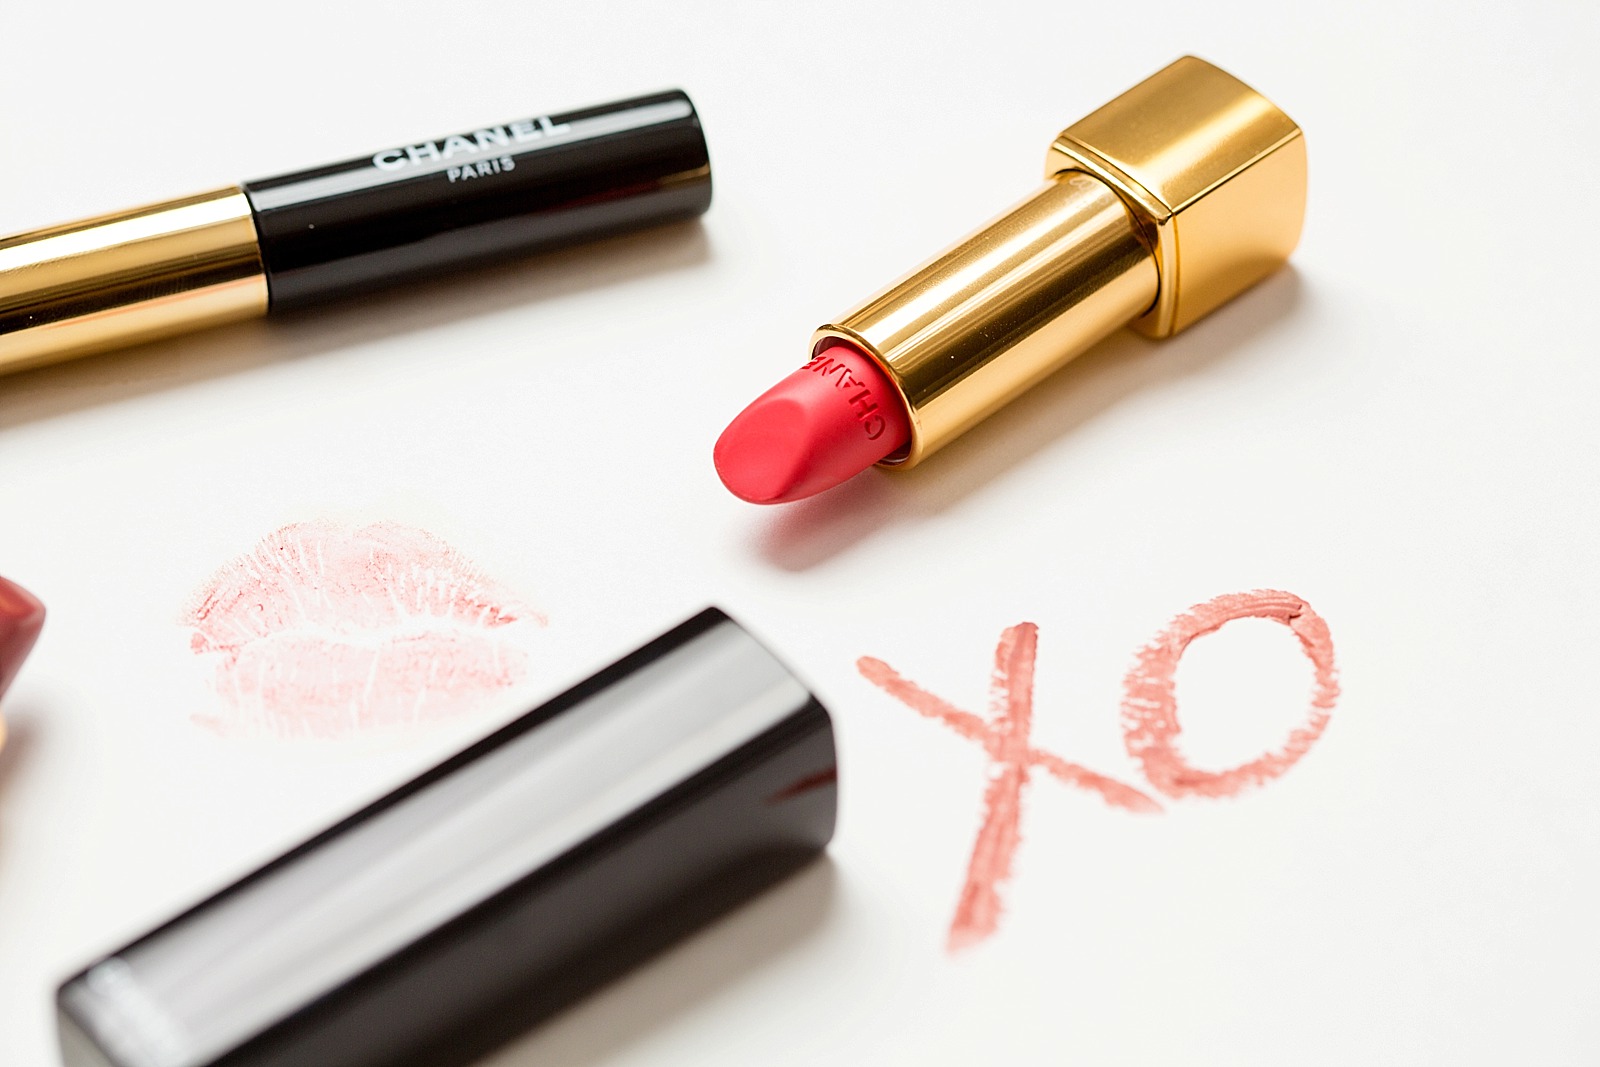 Pucker up with Chanel - 3 lipstick looks - Diana Elizabeth